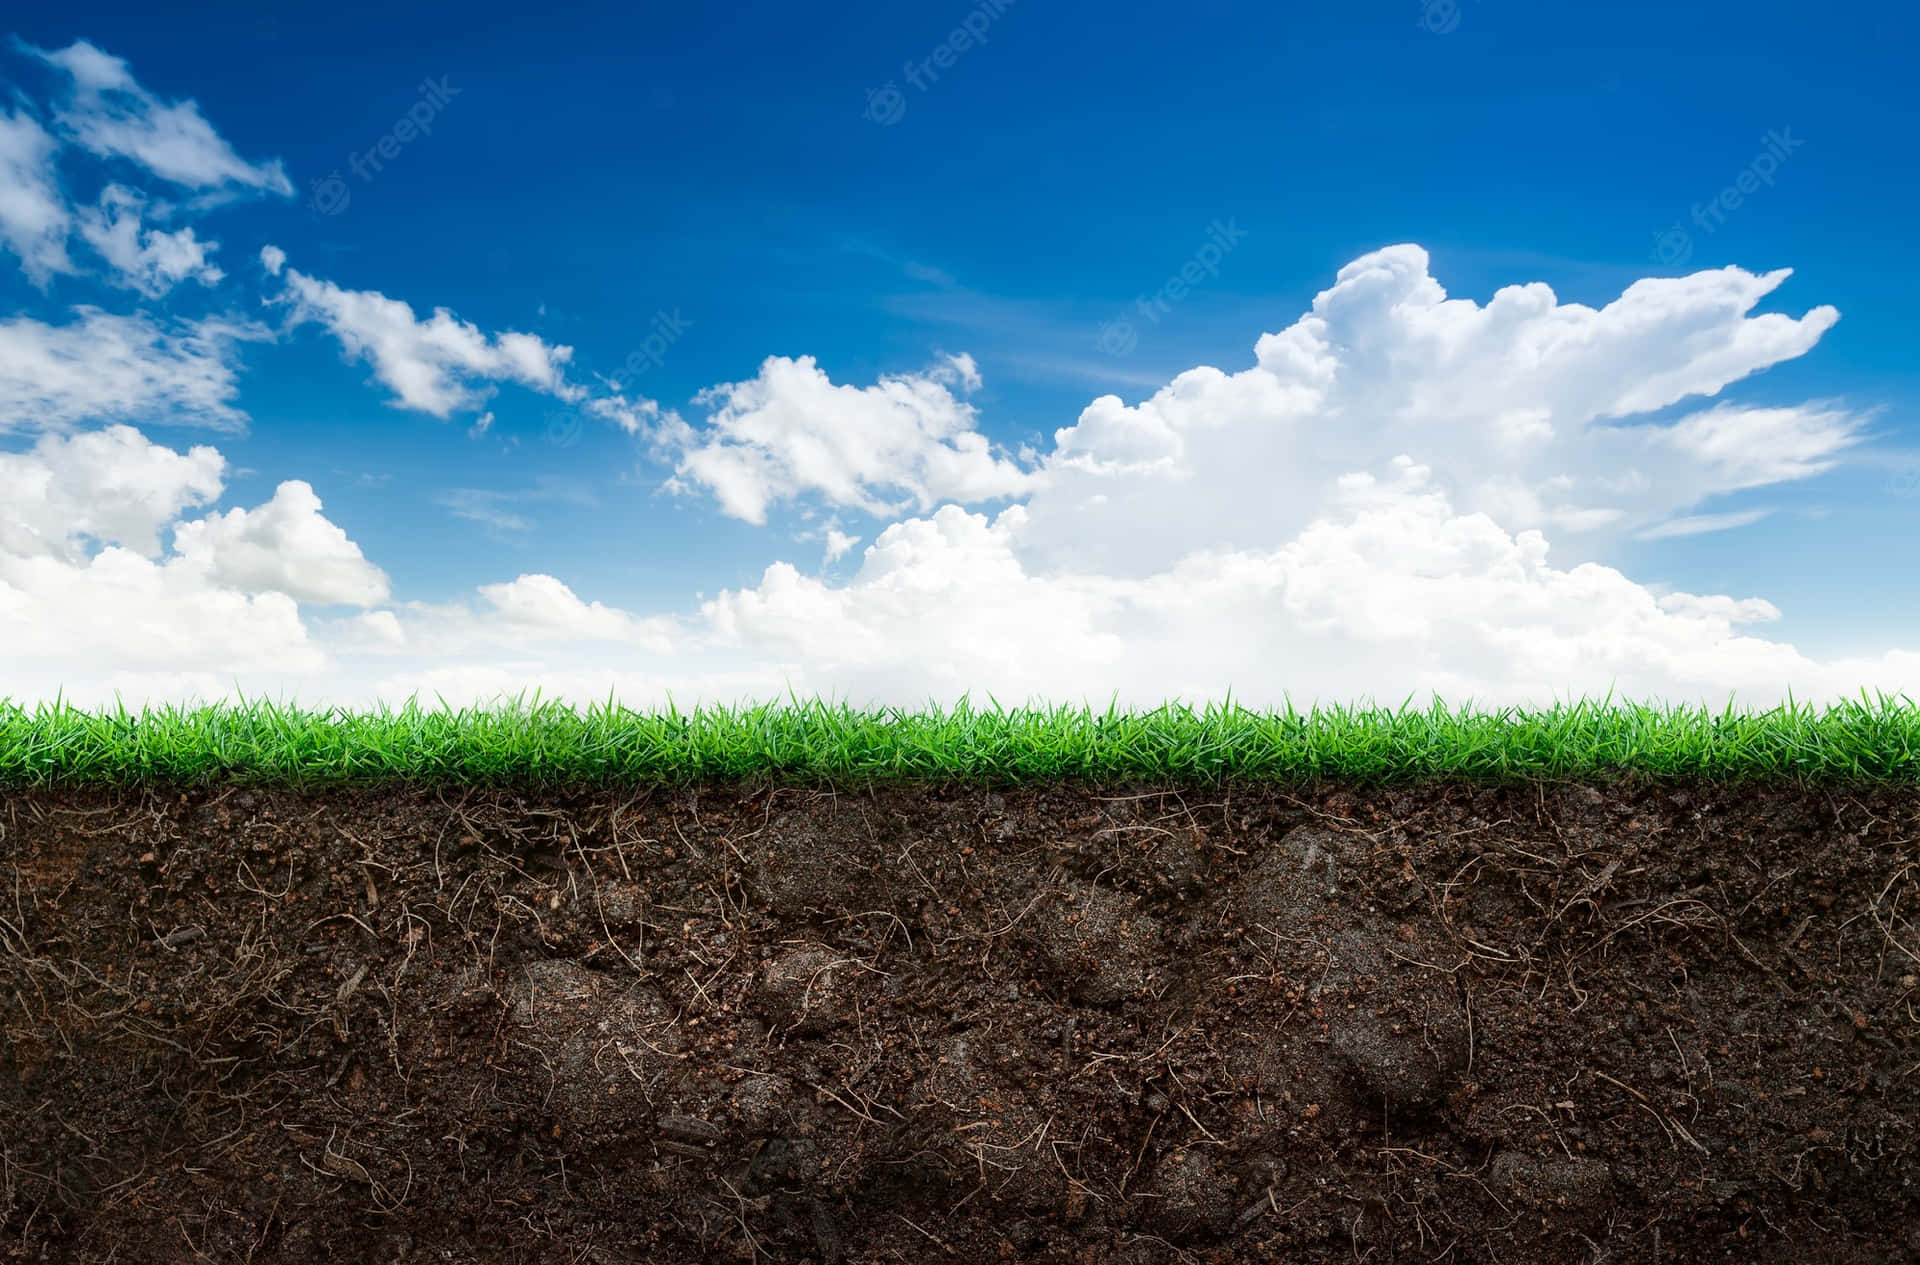 Cross-section Of A Grass And Soil Wallpaper